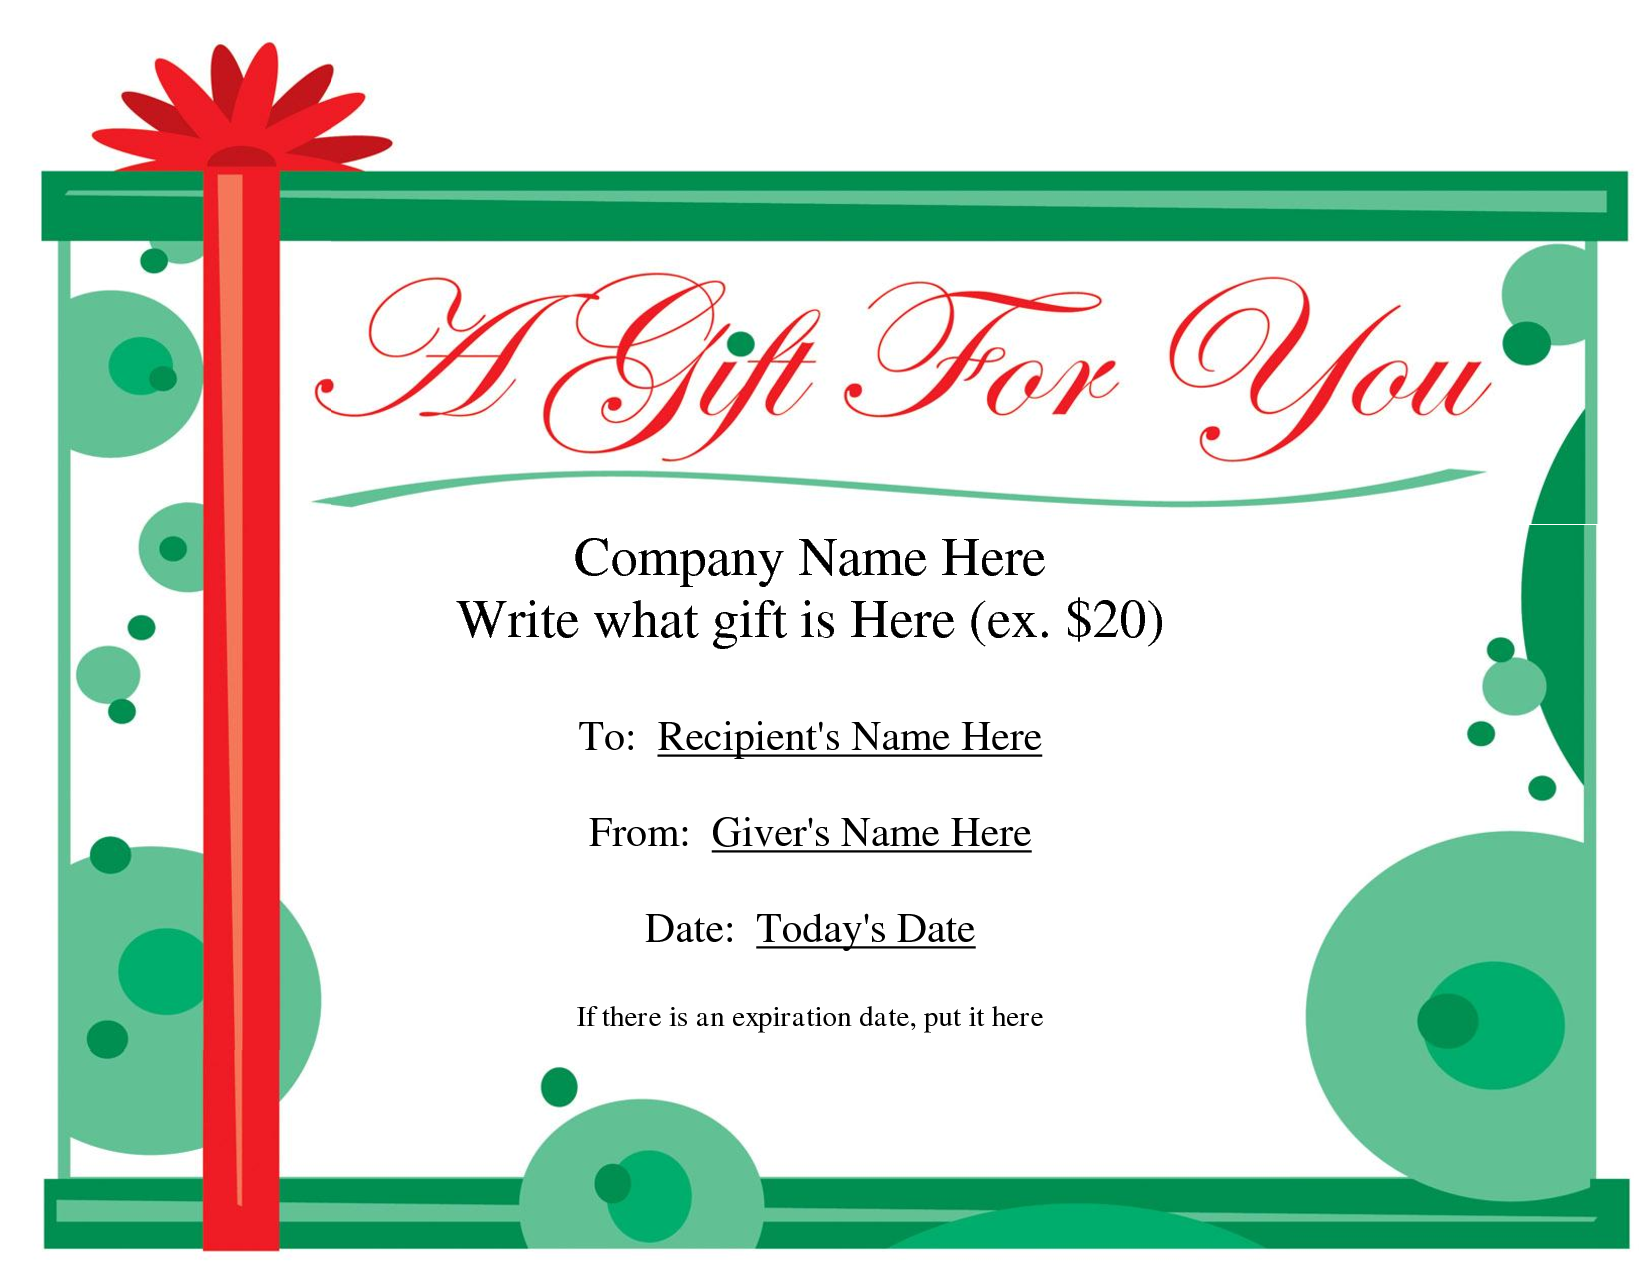 document-free-gift-certificate-template